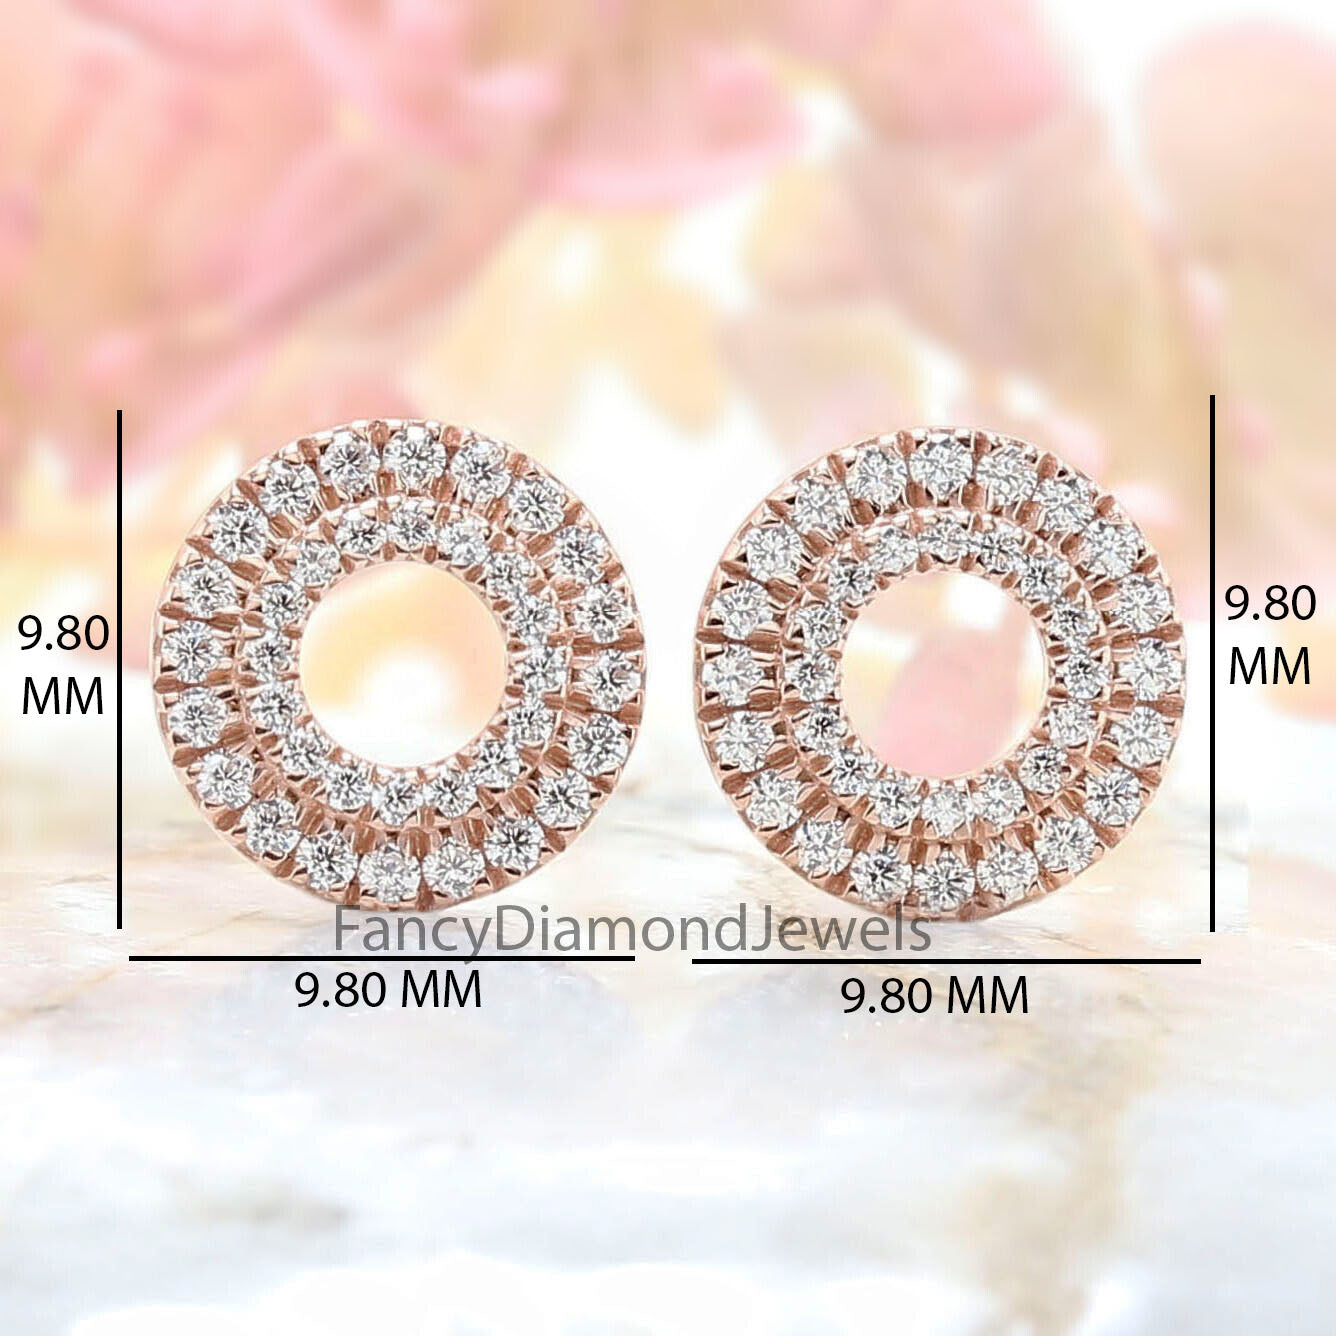 Round White Color Diamond Earring Engagement Wedding Gift Earring 14K Solid Rose White Yellow Gold Earring 0.57 CT KD975